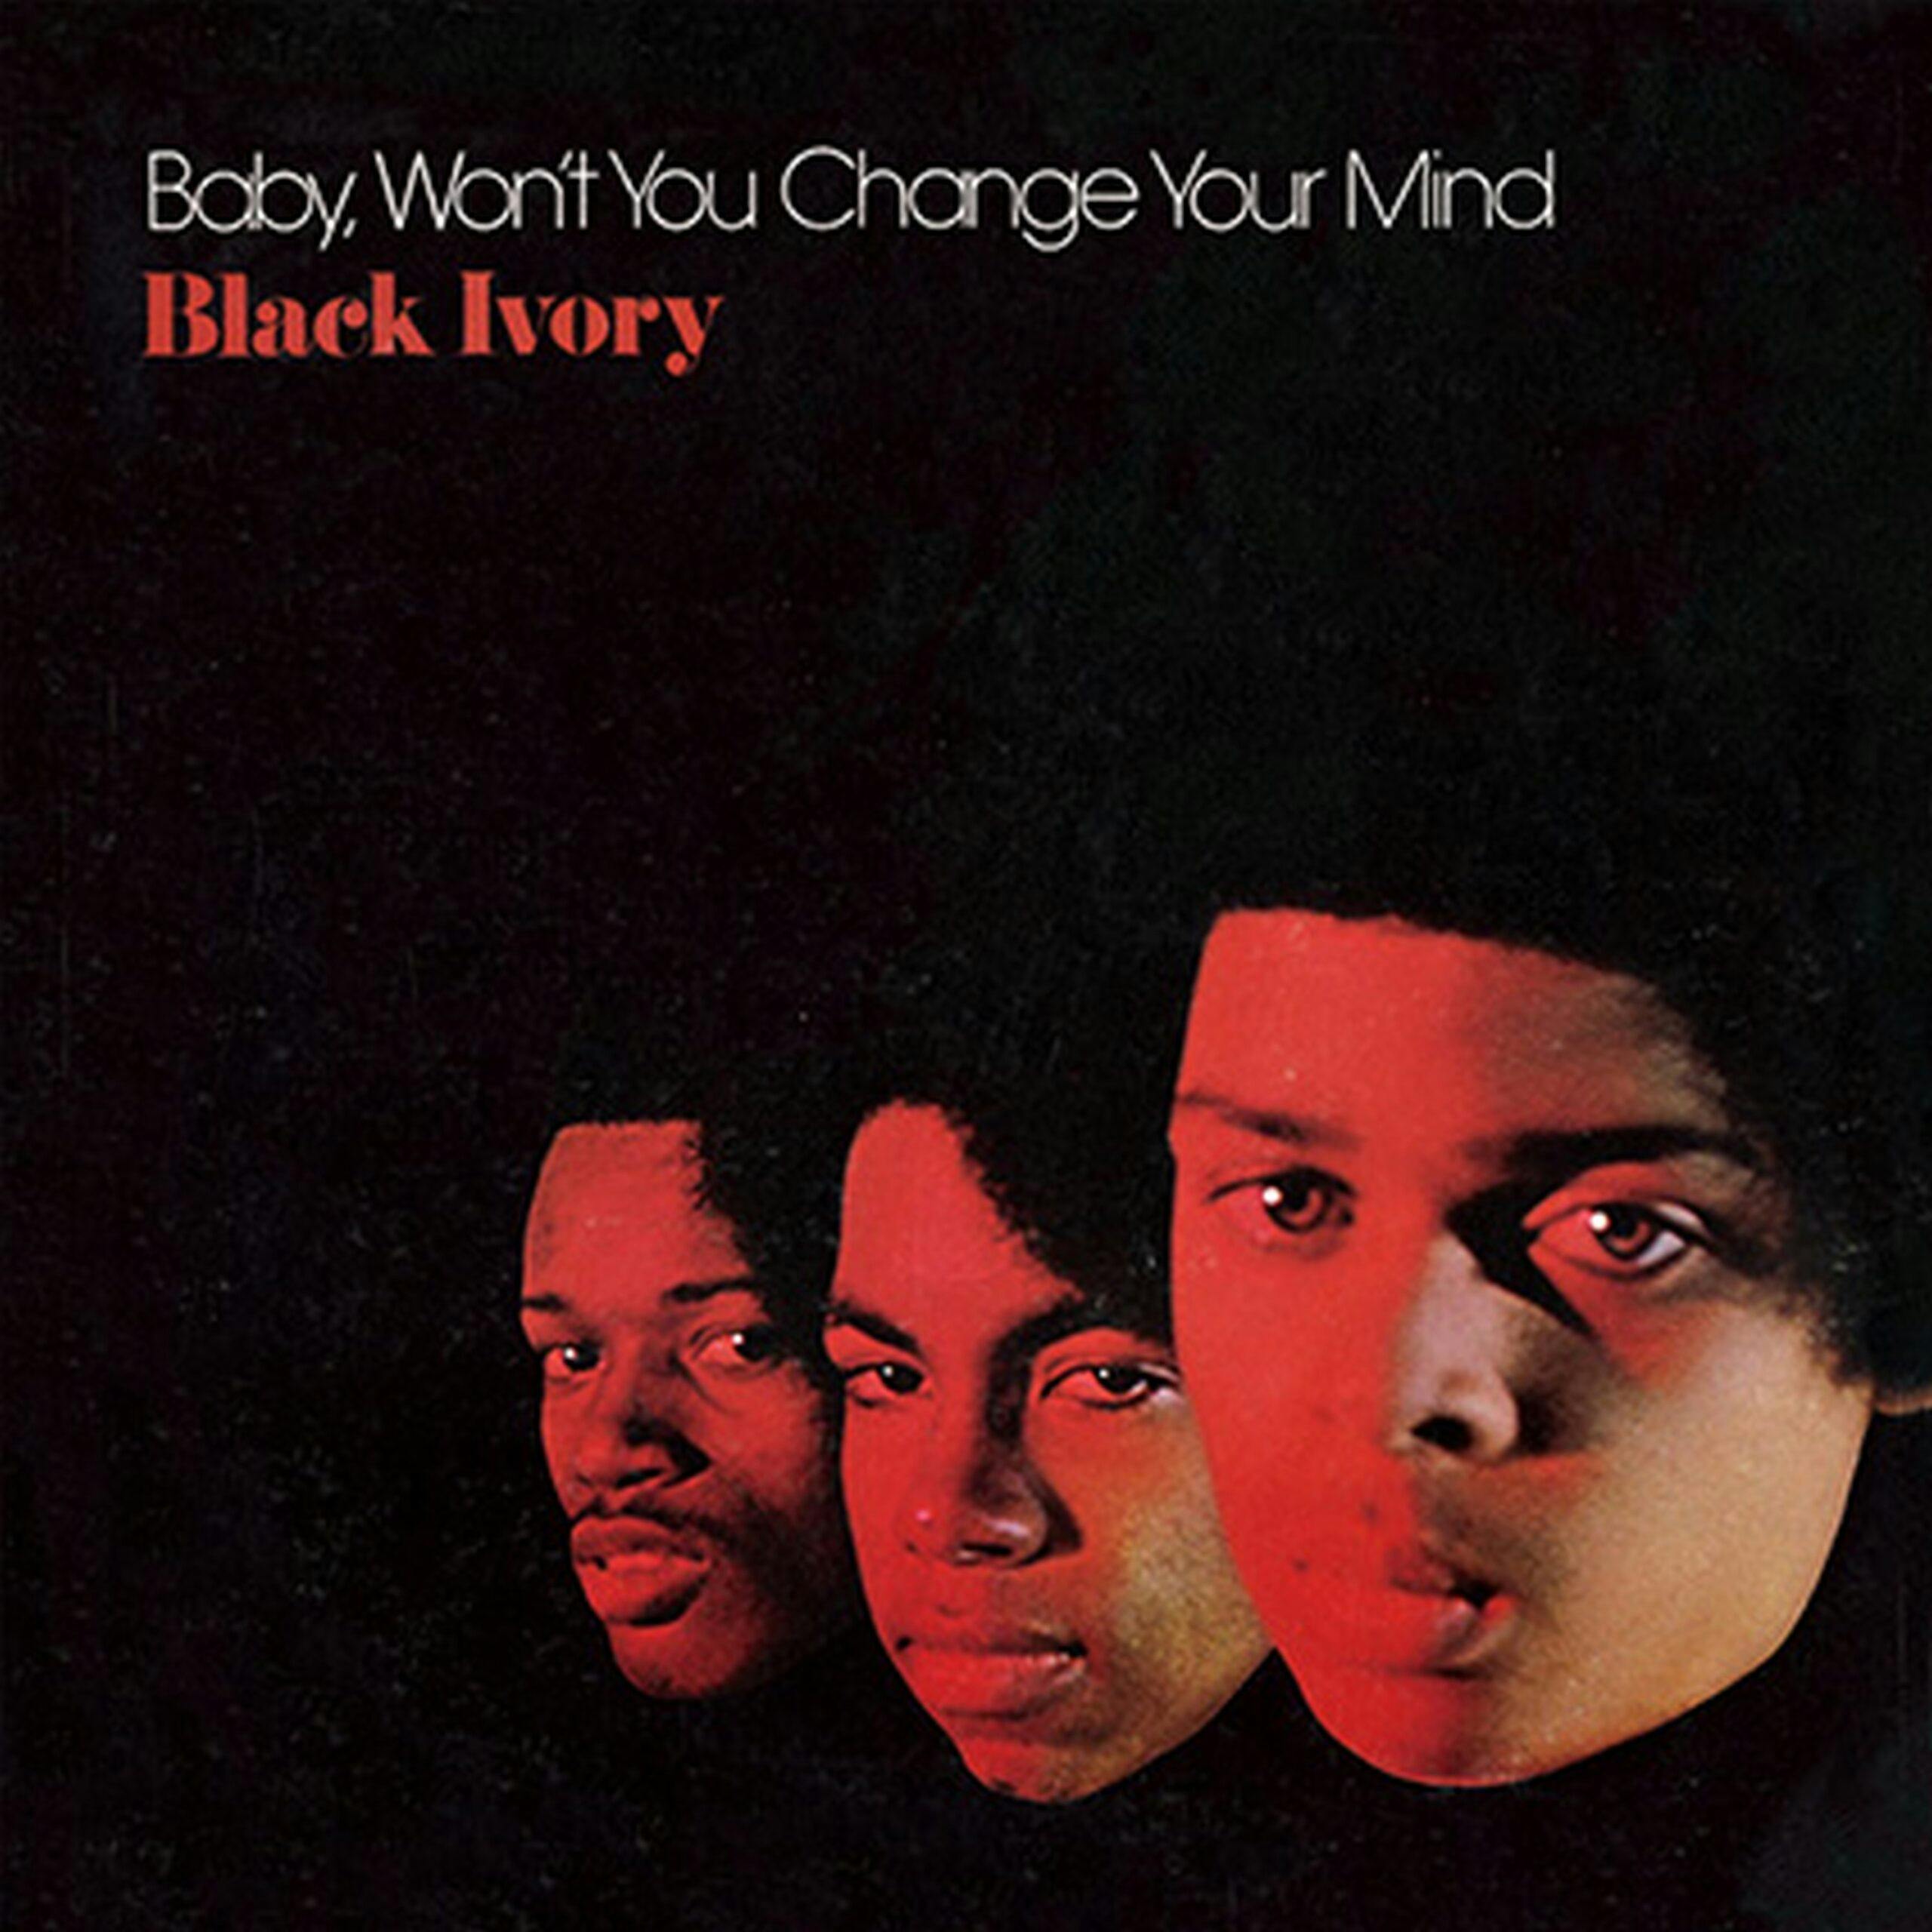 Released later in the same year as their debut album, Baby Won't You Change Your Mind is a strong follow-up to Don't Turn Around and one which further cements the creative partnership of lead vocalist Leroy Burgess and producer and arranger Patrick Adams. Both would then go on to form The Universal Robot Band in the mid-70's.